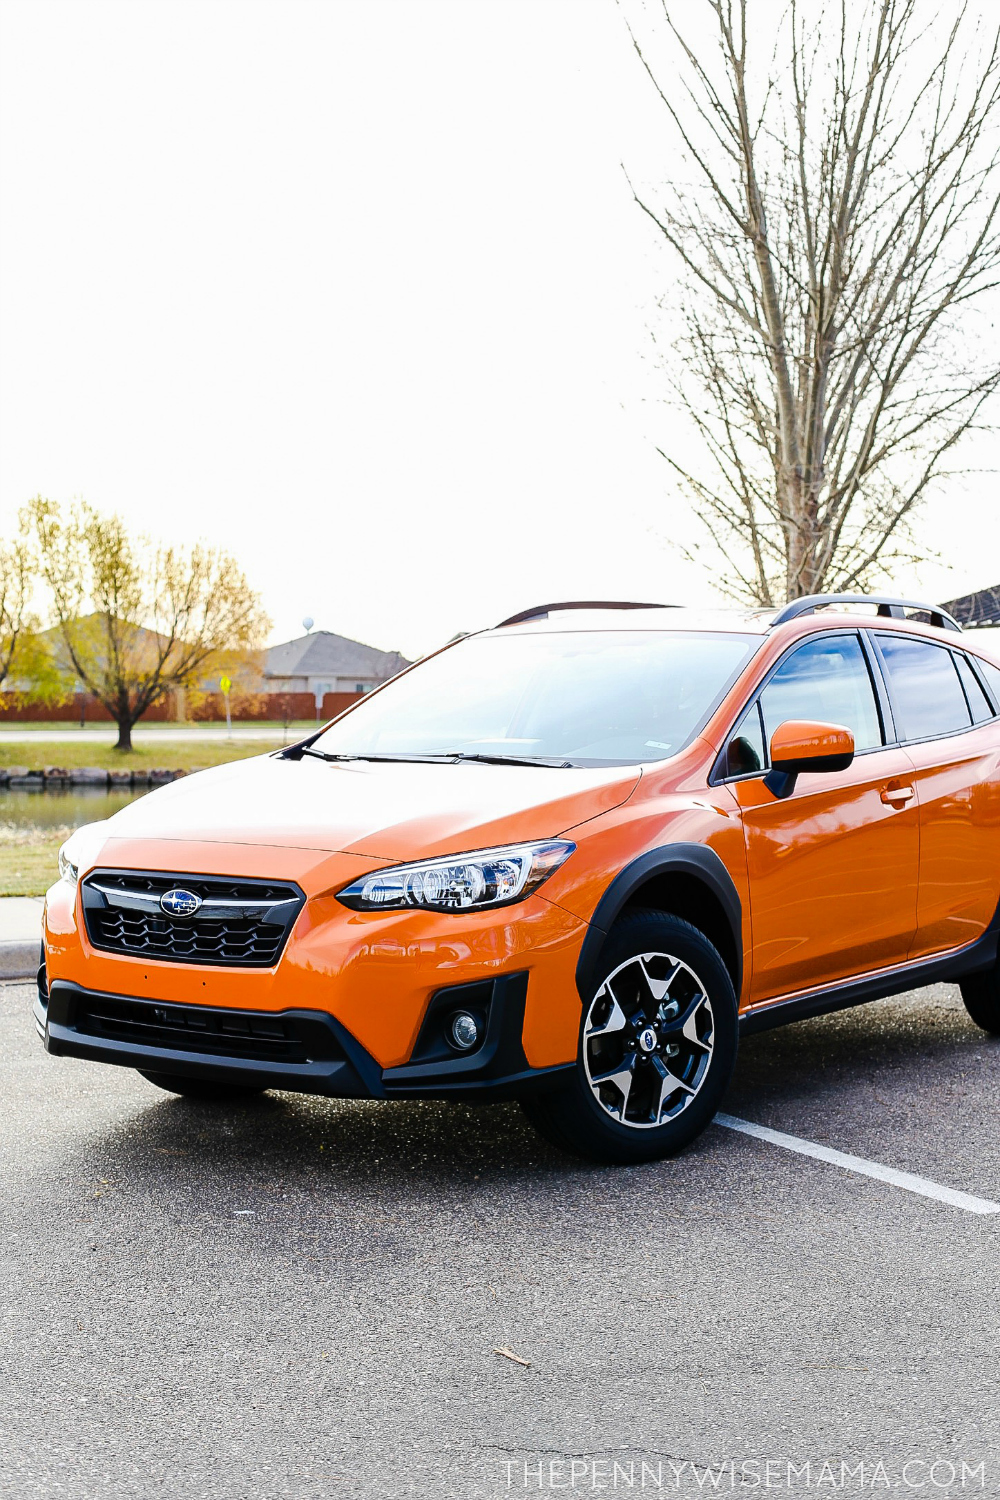 Why the 2018 Subaru Crosstrek is a Great Value for Your Money